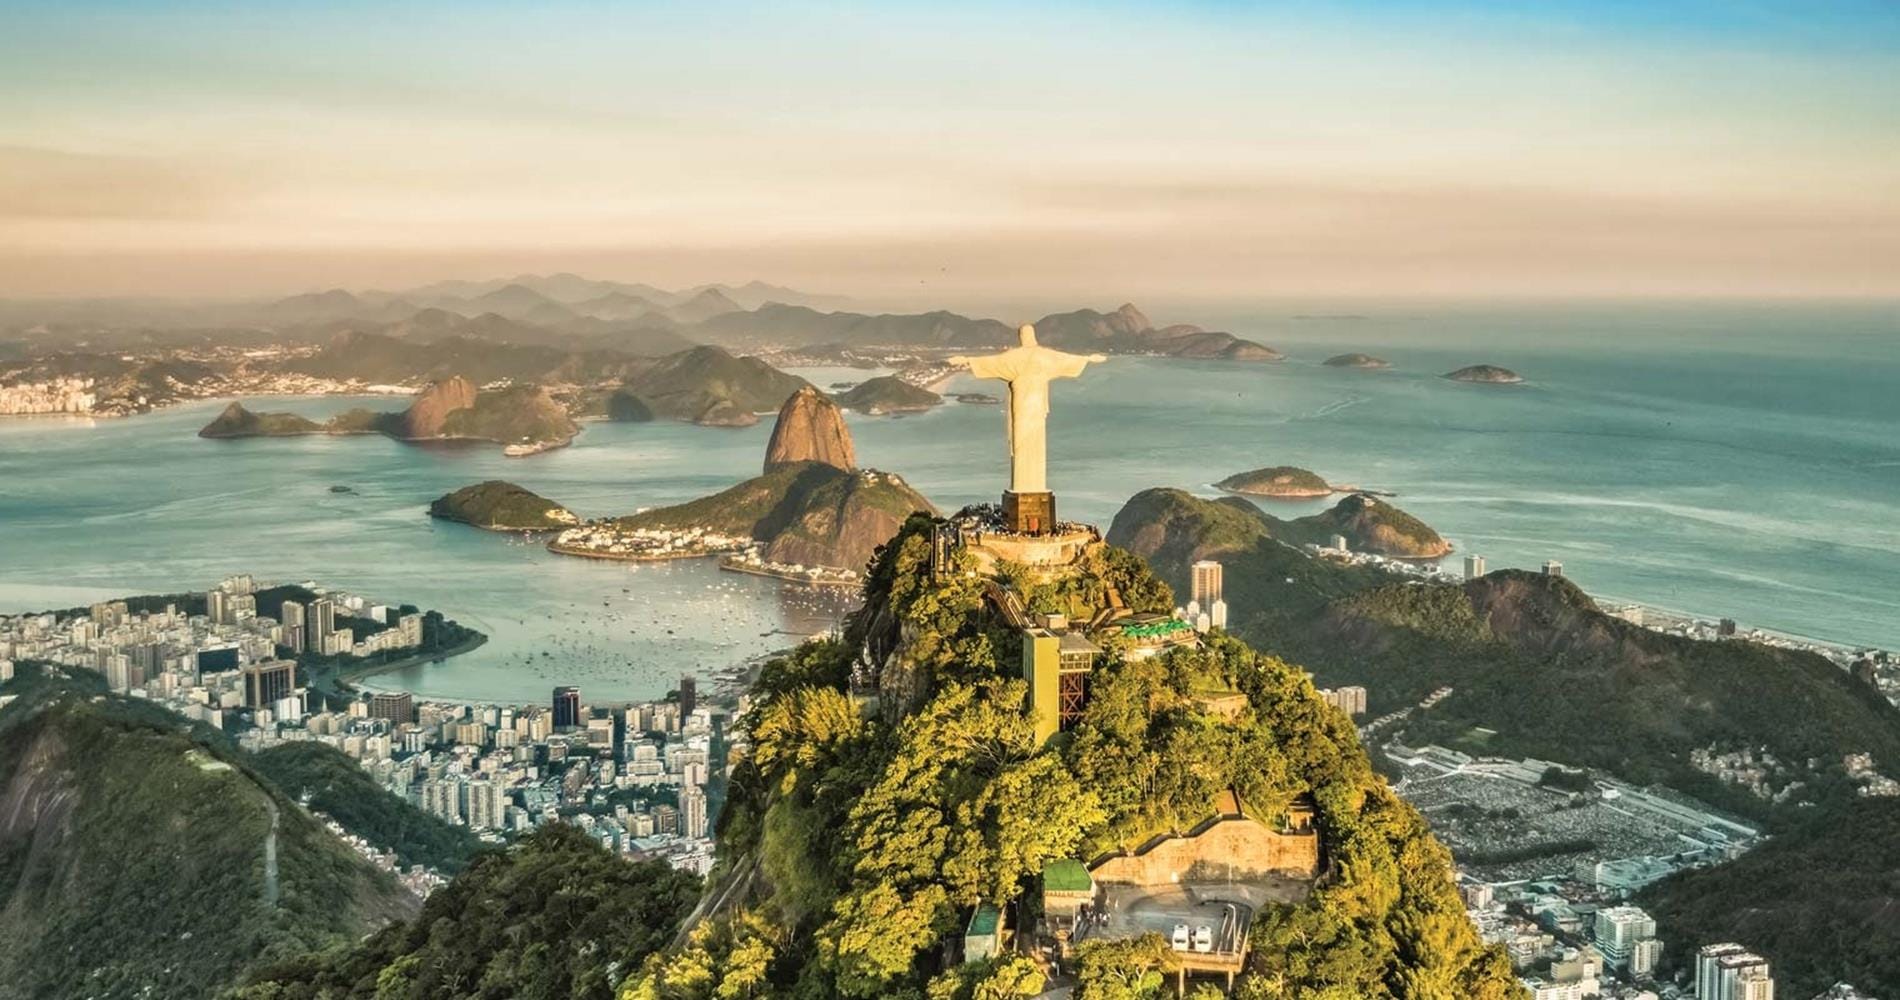 View of christ the redeemer overlooking city and coastline, Brazil